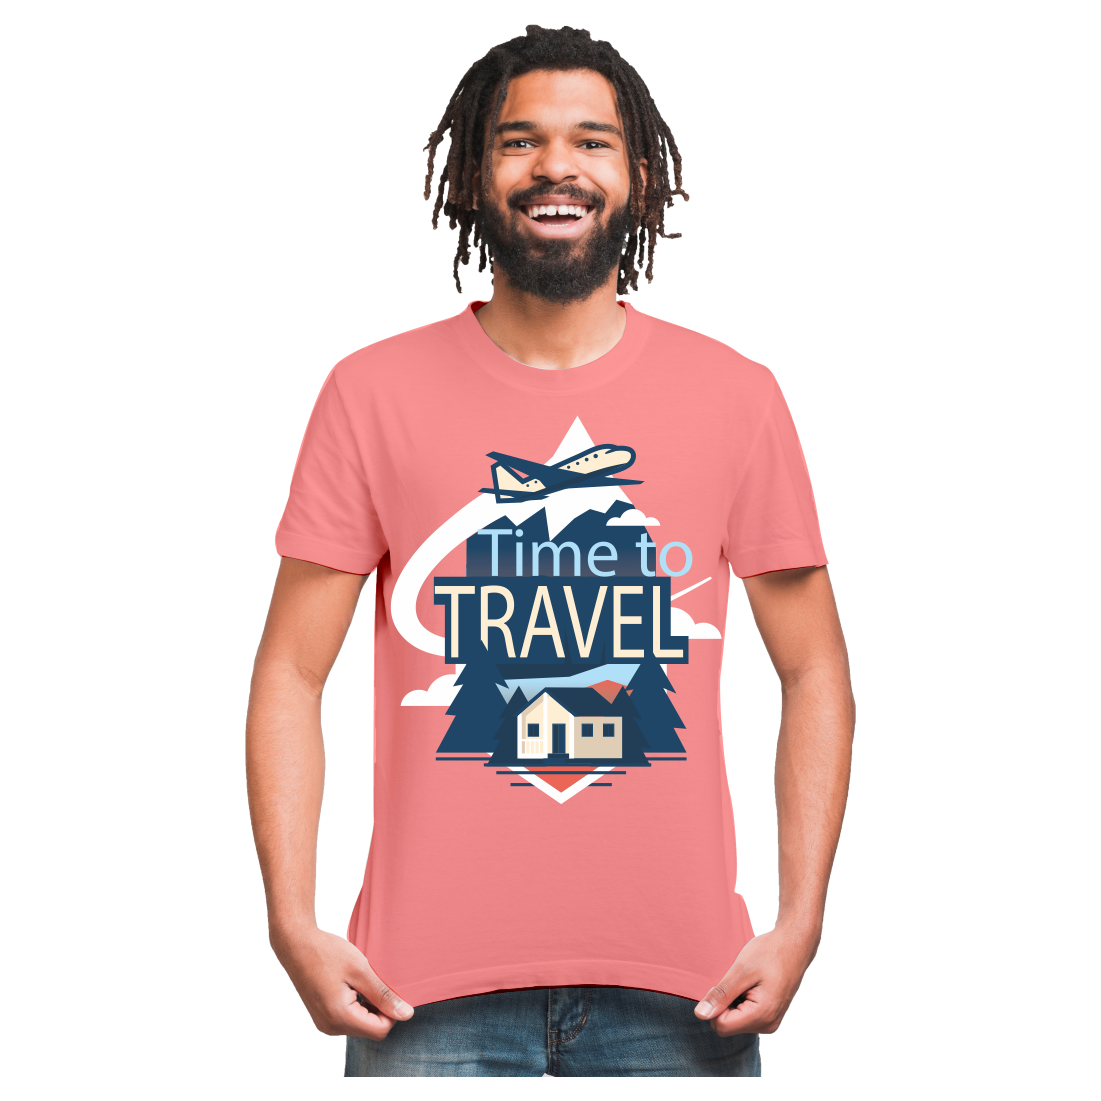 TIME TO TRAVEL PRINTED T-SHIRTS